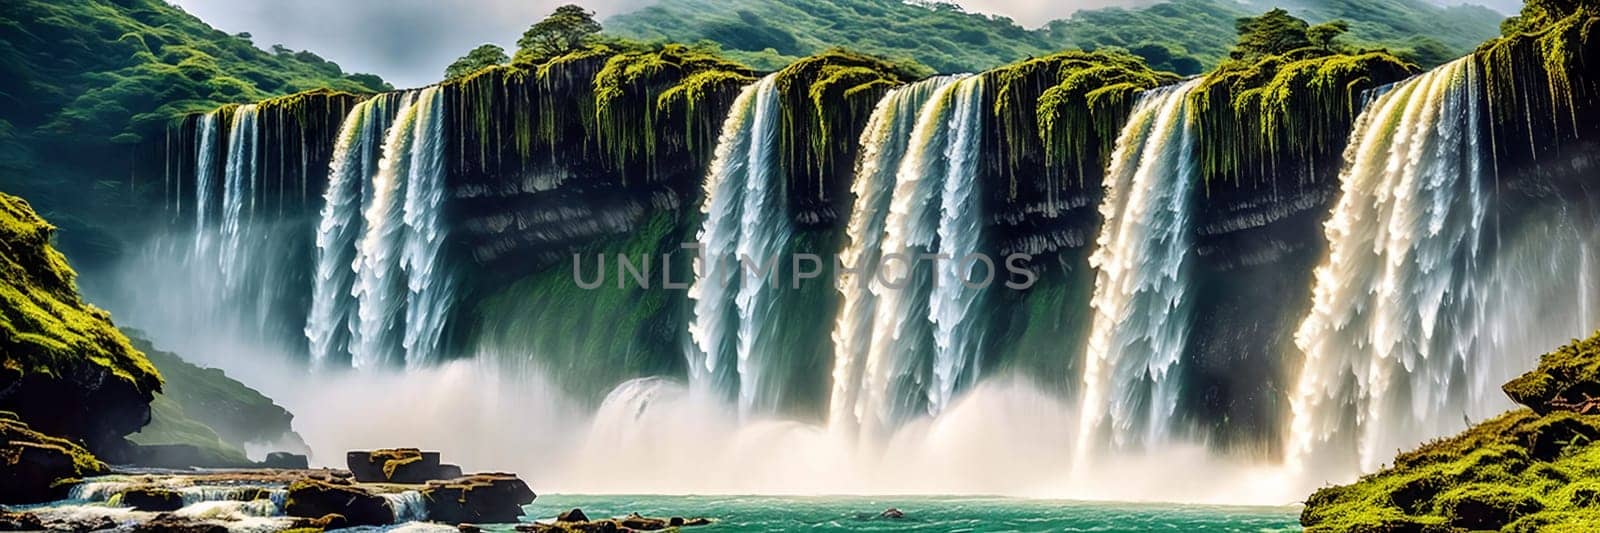 Witness a majestic waterfall plunging down a rocky cliff and beauty of nature in a mesmerizing capture by GoodOlga